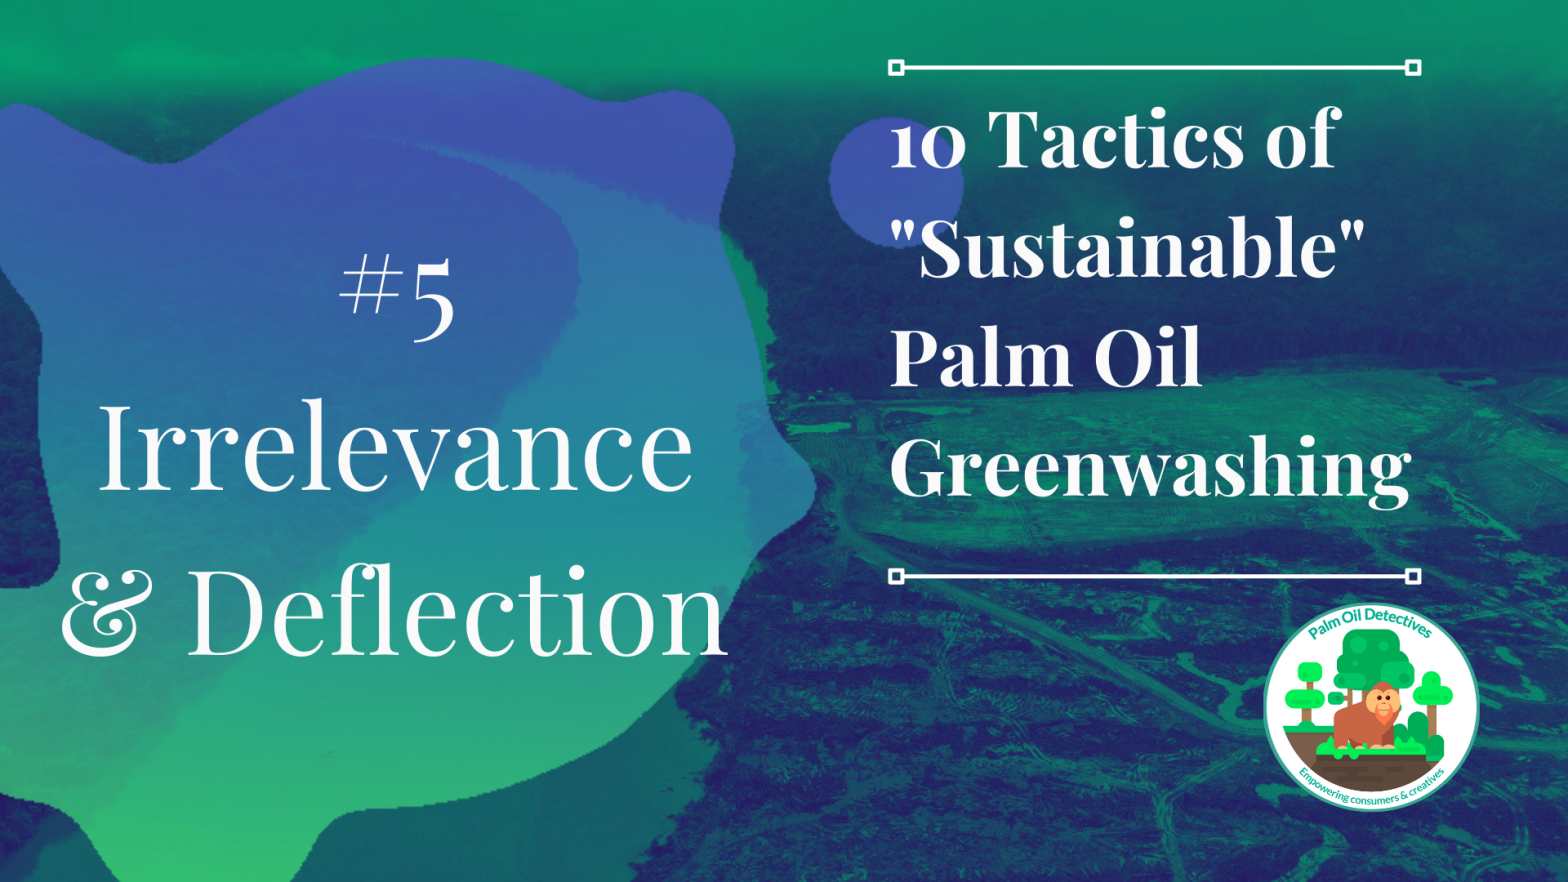 10 Tactics of Sustainable Palm Oil Greenwashing - Tactic 5 Irrelevance deflecti on